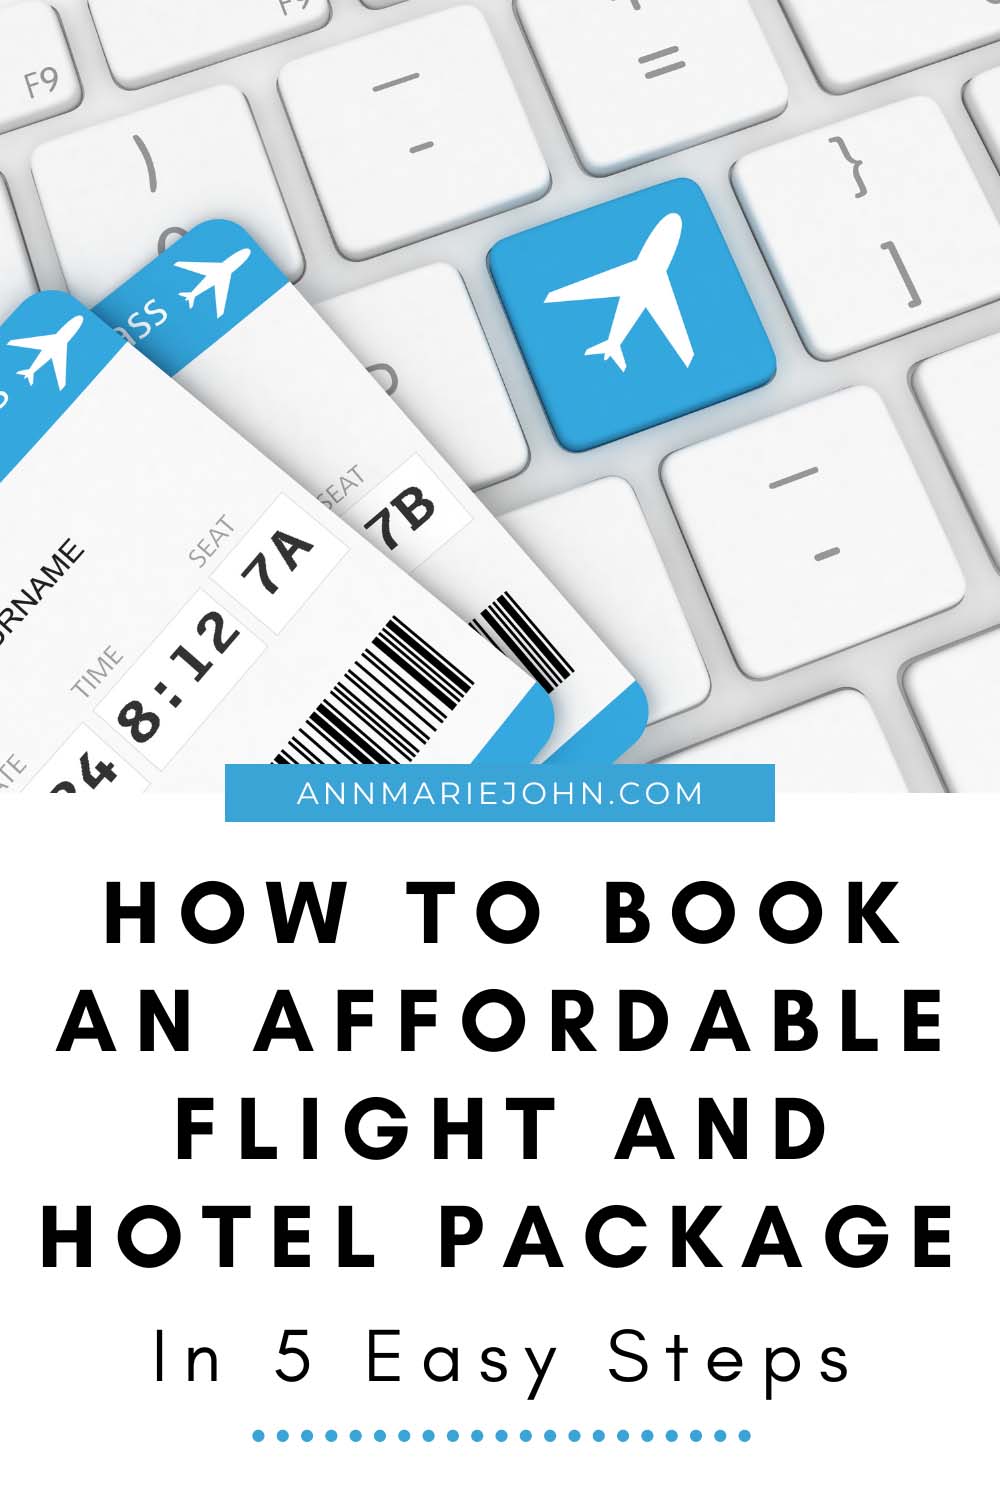 Book an Affordable Flight and Hotel